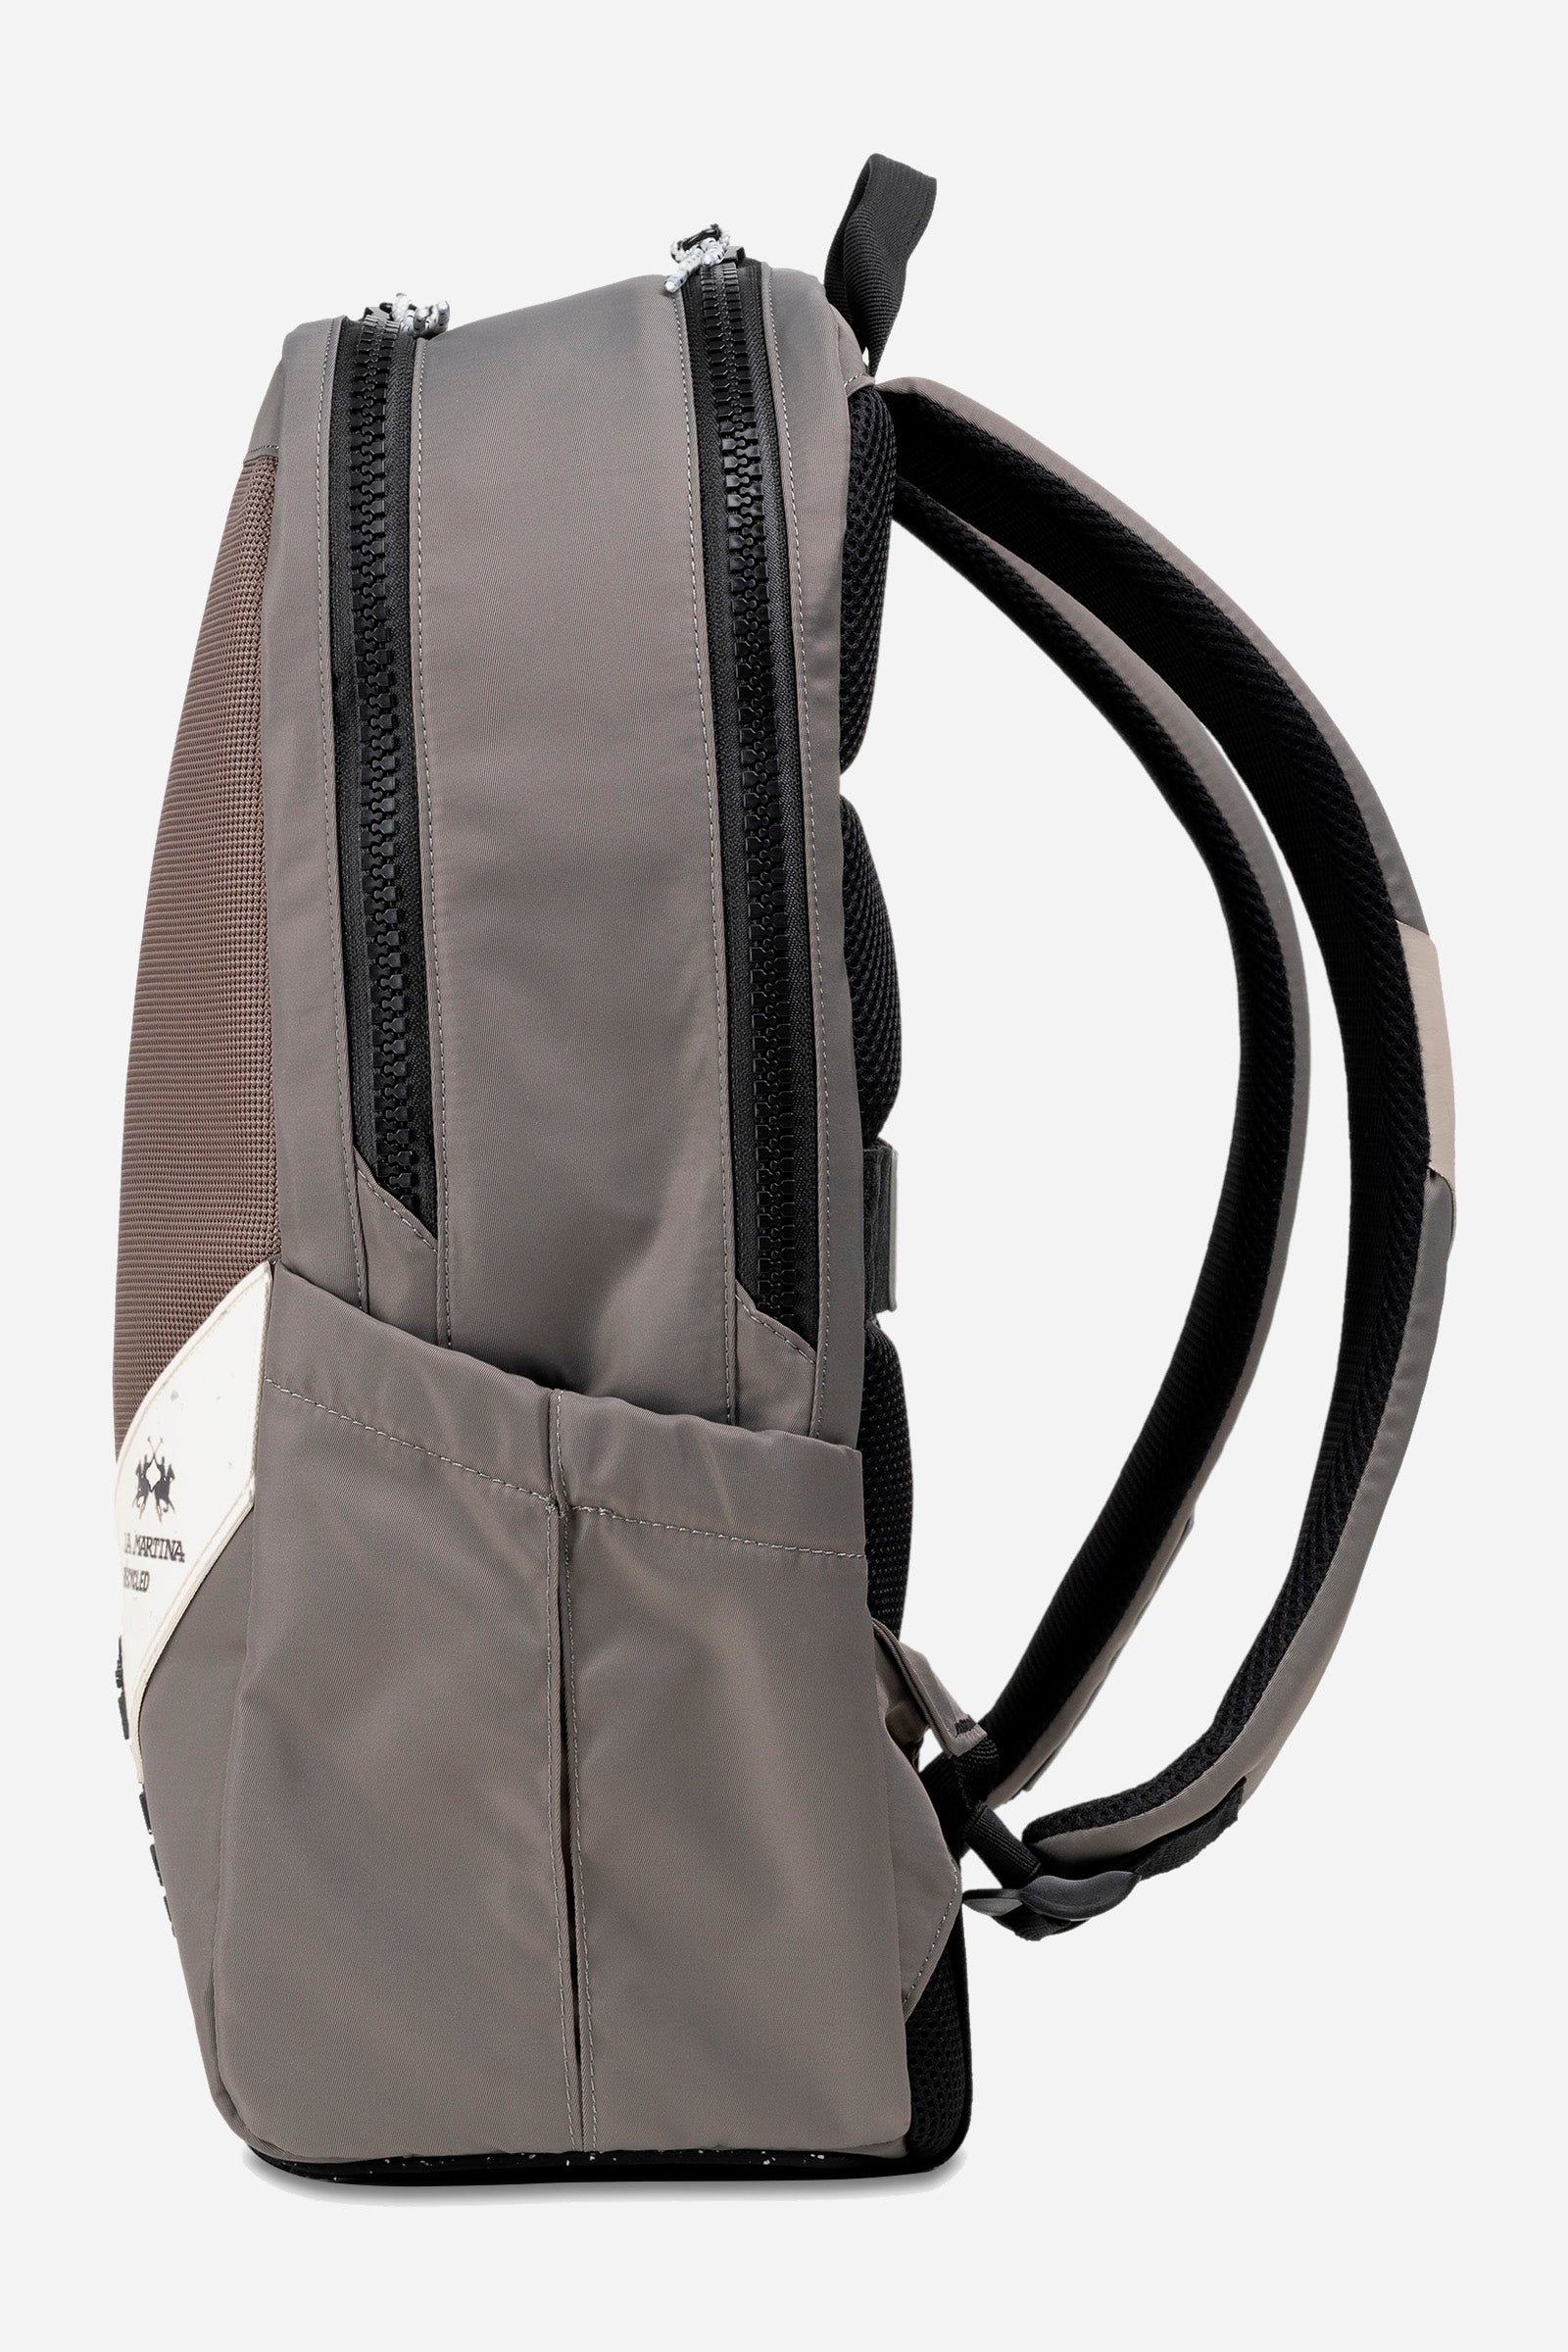 Rucksack made from recycled polyester fabric and recycled microfibre inserts